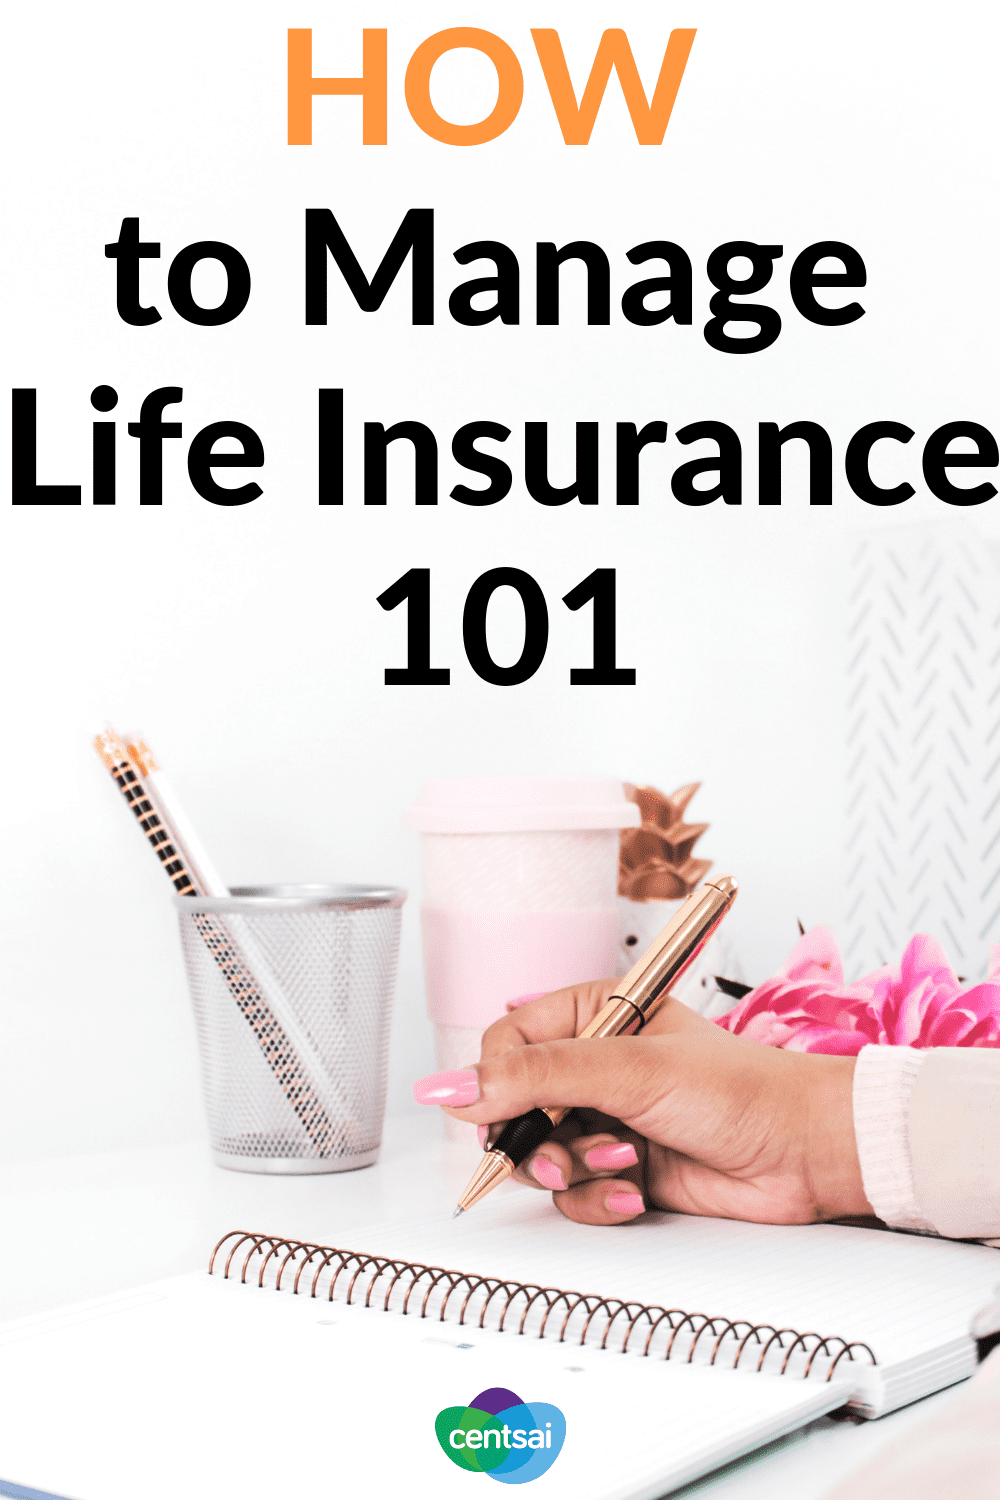 How to Manage Life Insurance 101. Is life insurance tax-free? Are there any exceptions? Get answers to your questions about life insurance and taxes before you pick a policy. #Lifeinsurance #insurance